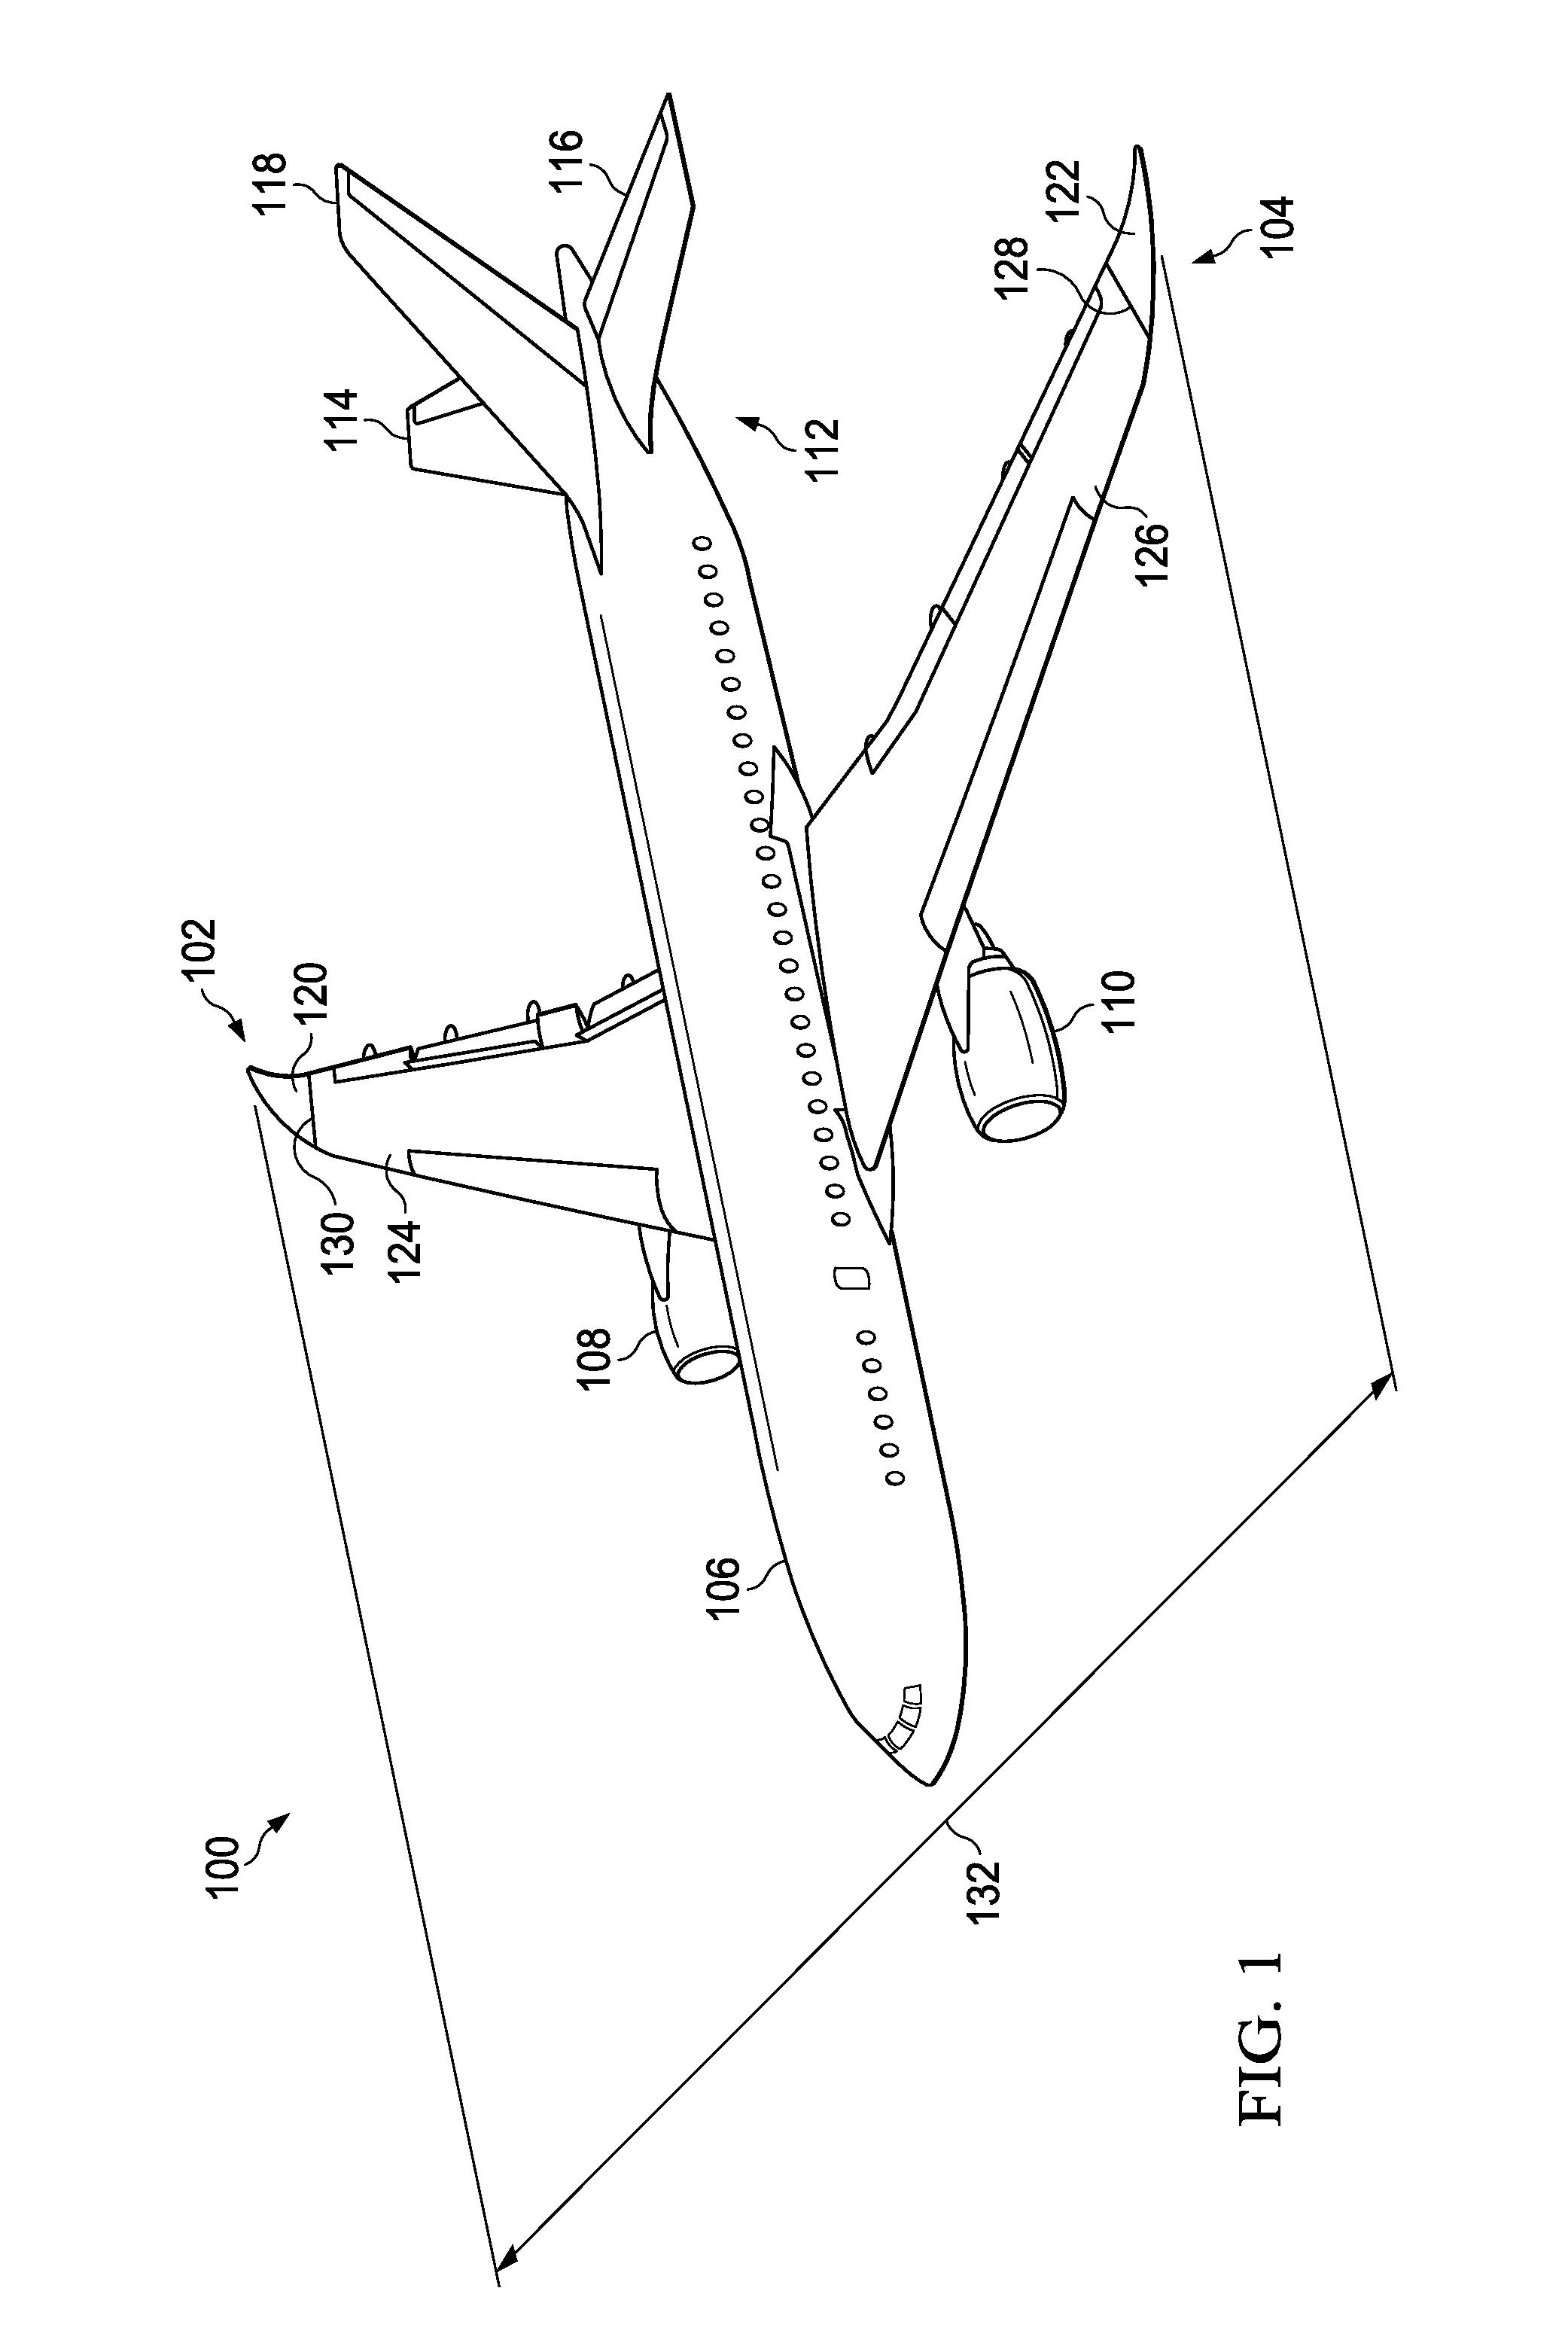 Wing fold system with latch pins through multiple mating lugs